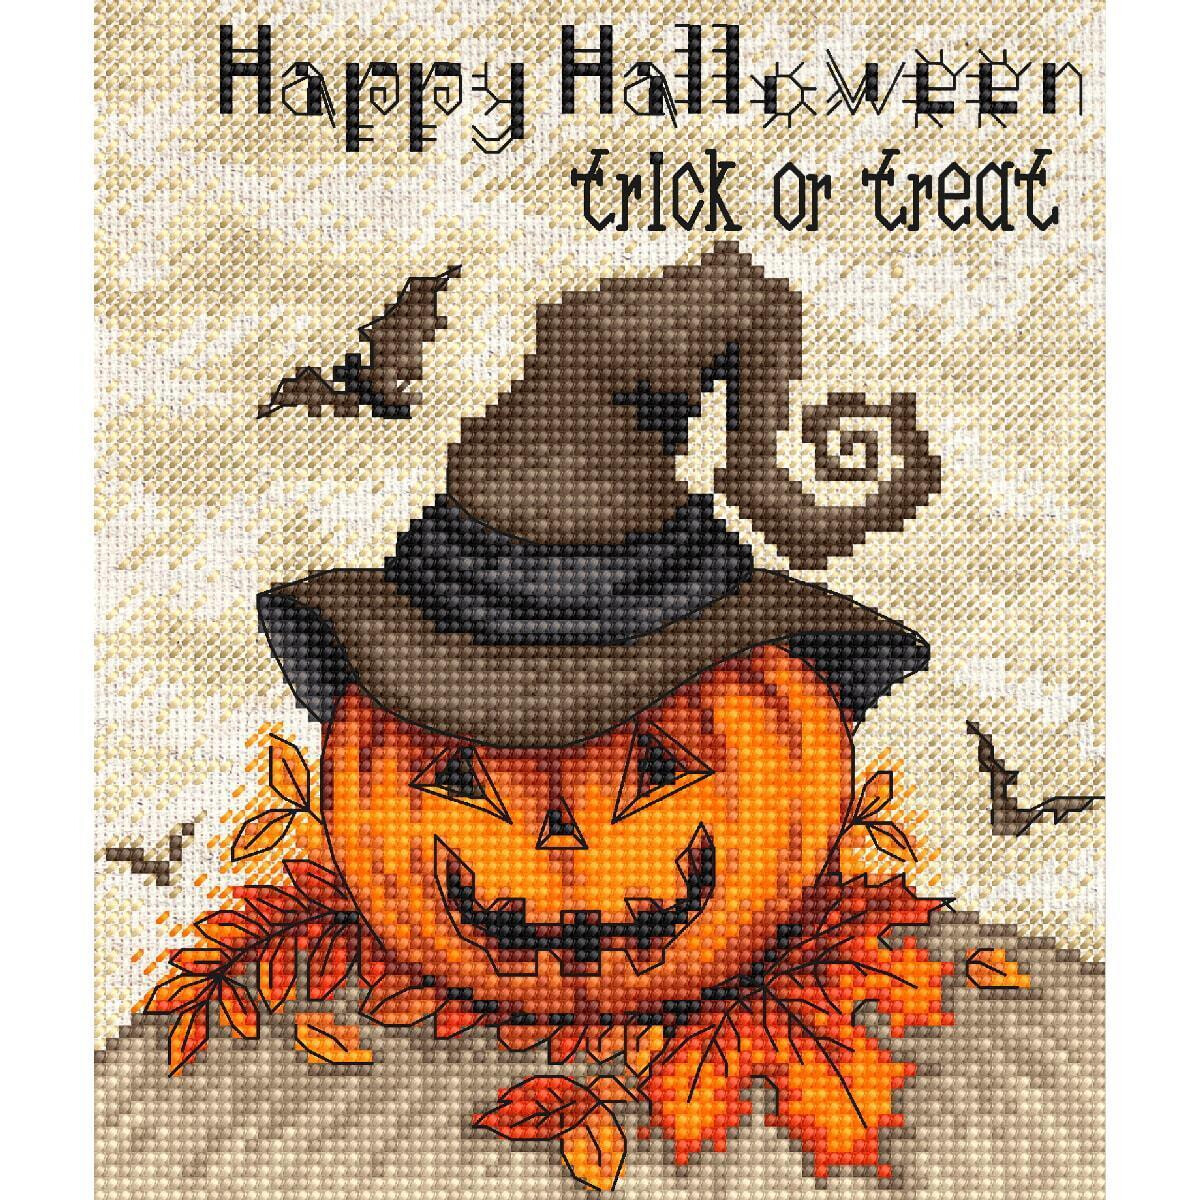 Letistitch counted cross stitch kit "Trick or...